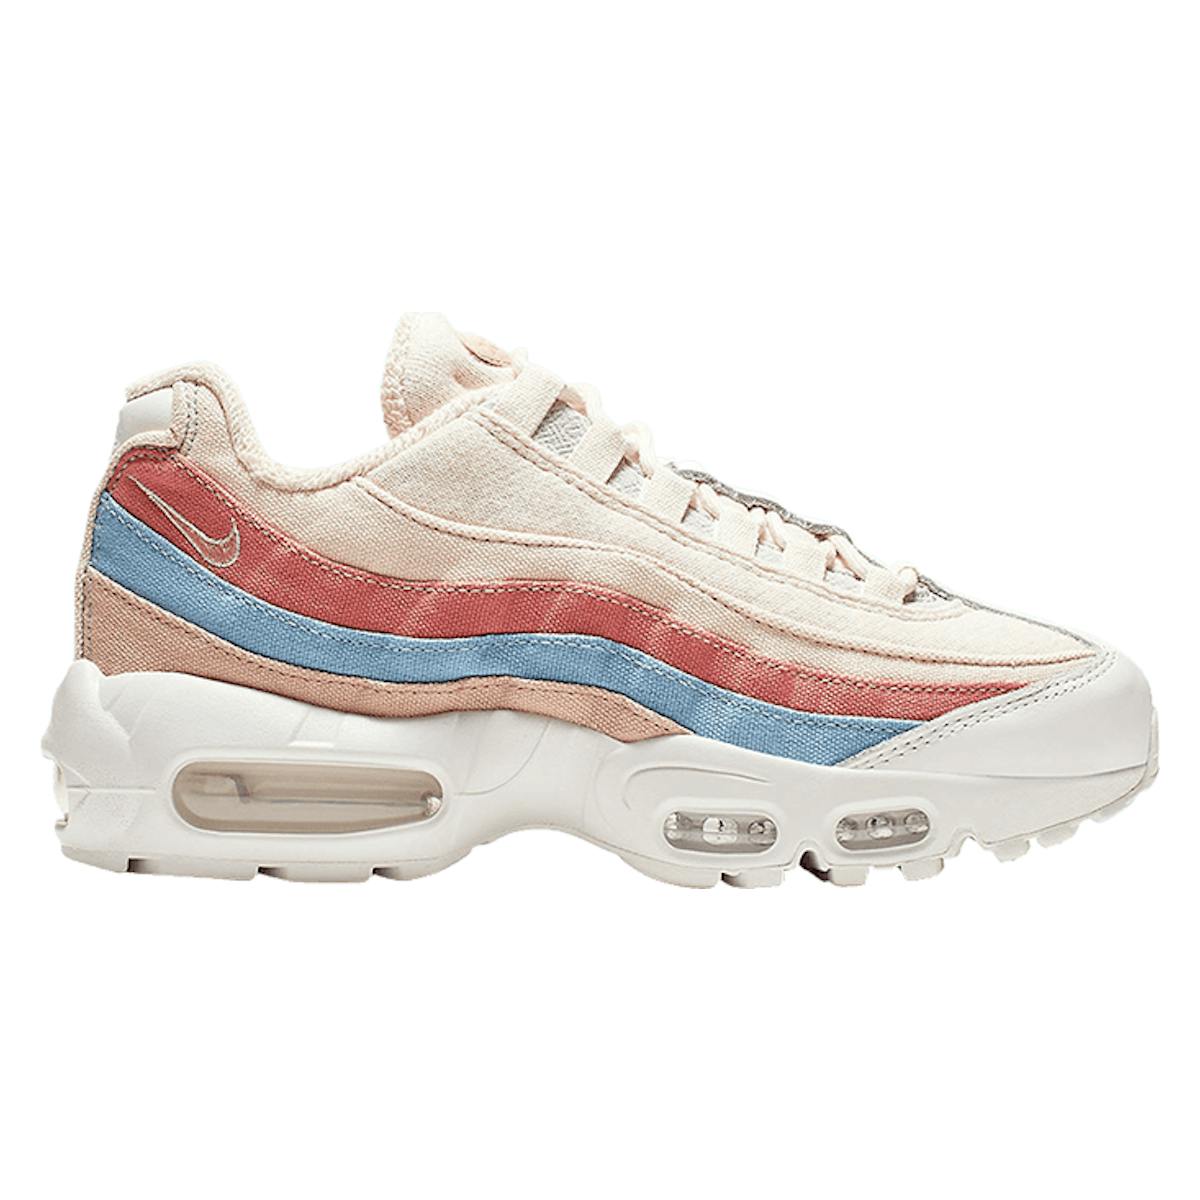 Nike Air Max 95 WMNS "Plant Color Collection"